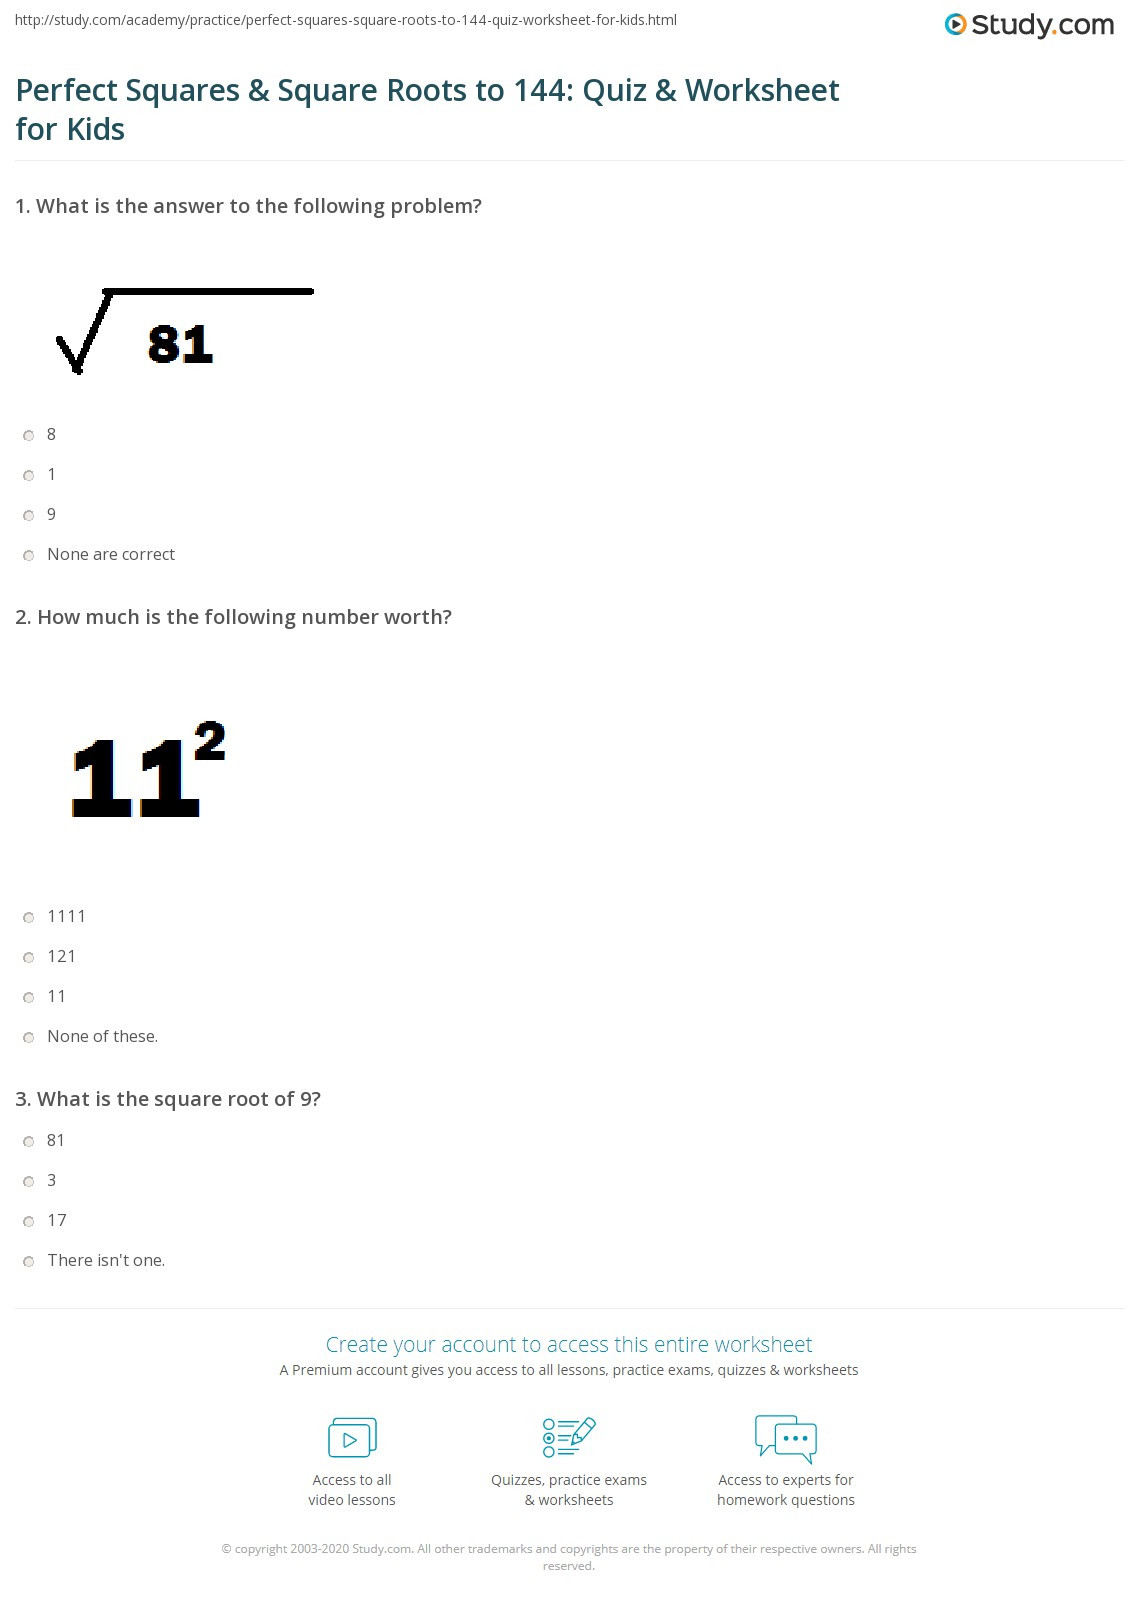 Squares and Square Roots Worksheet Perfect Squares &amp; Square Roots to 144 Quiz &amp; Worksheet for